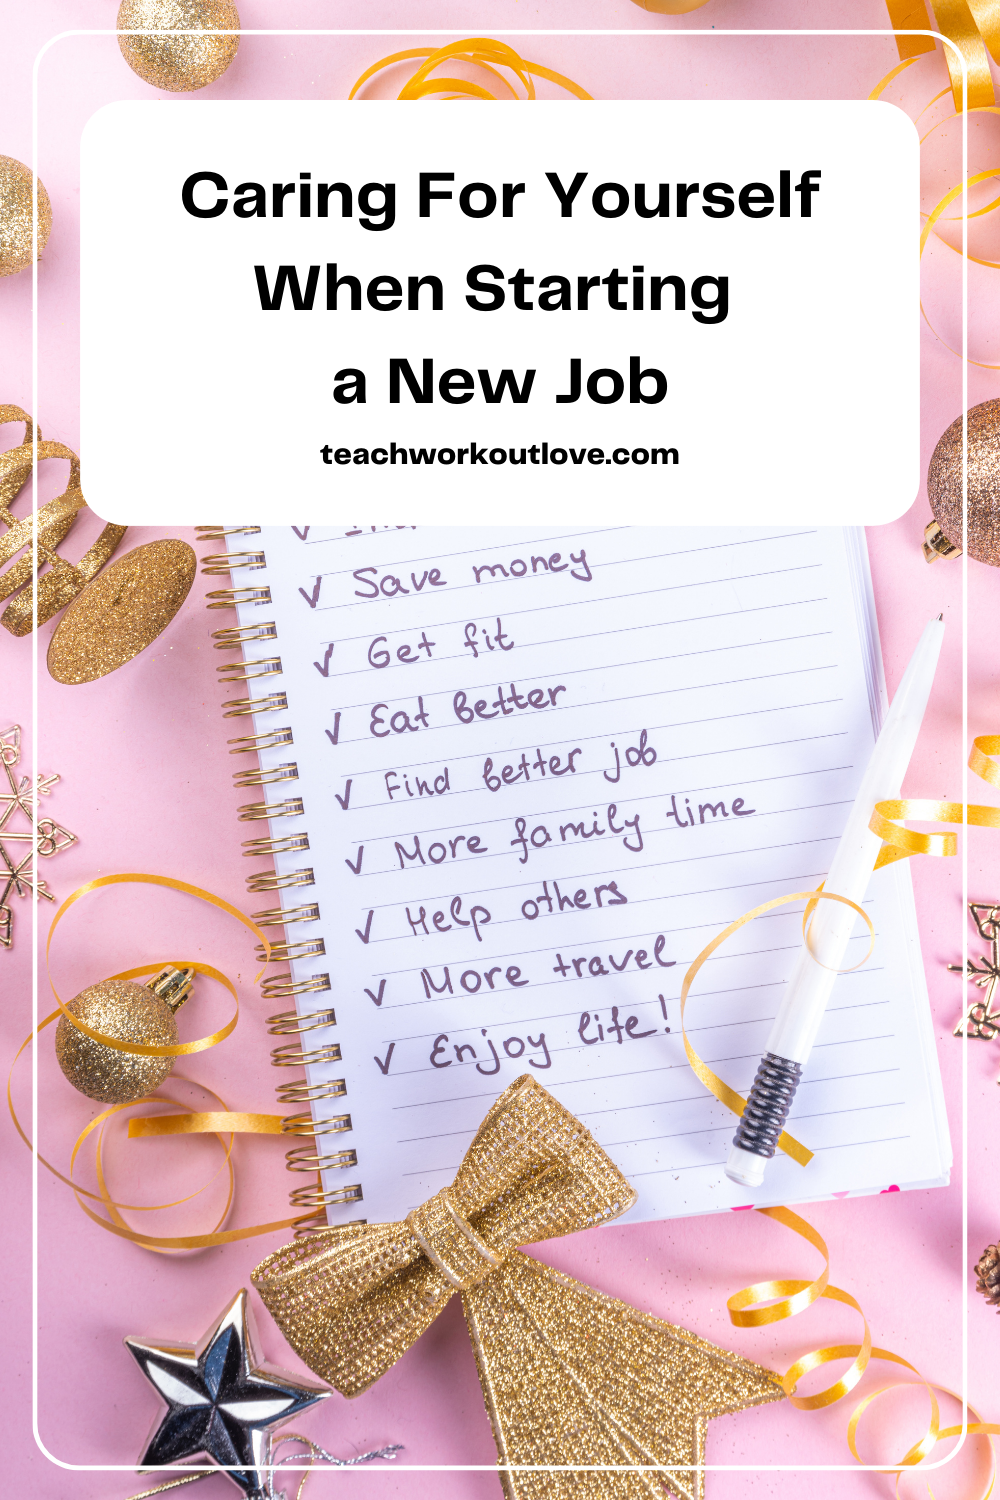 Looking to start a new job? We have some tips for you. Here are four simple ways to care for yourself when trying to start a new job.